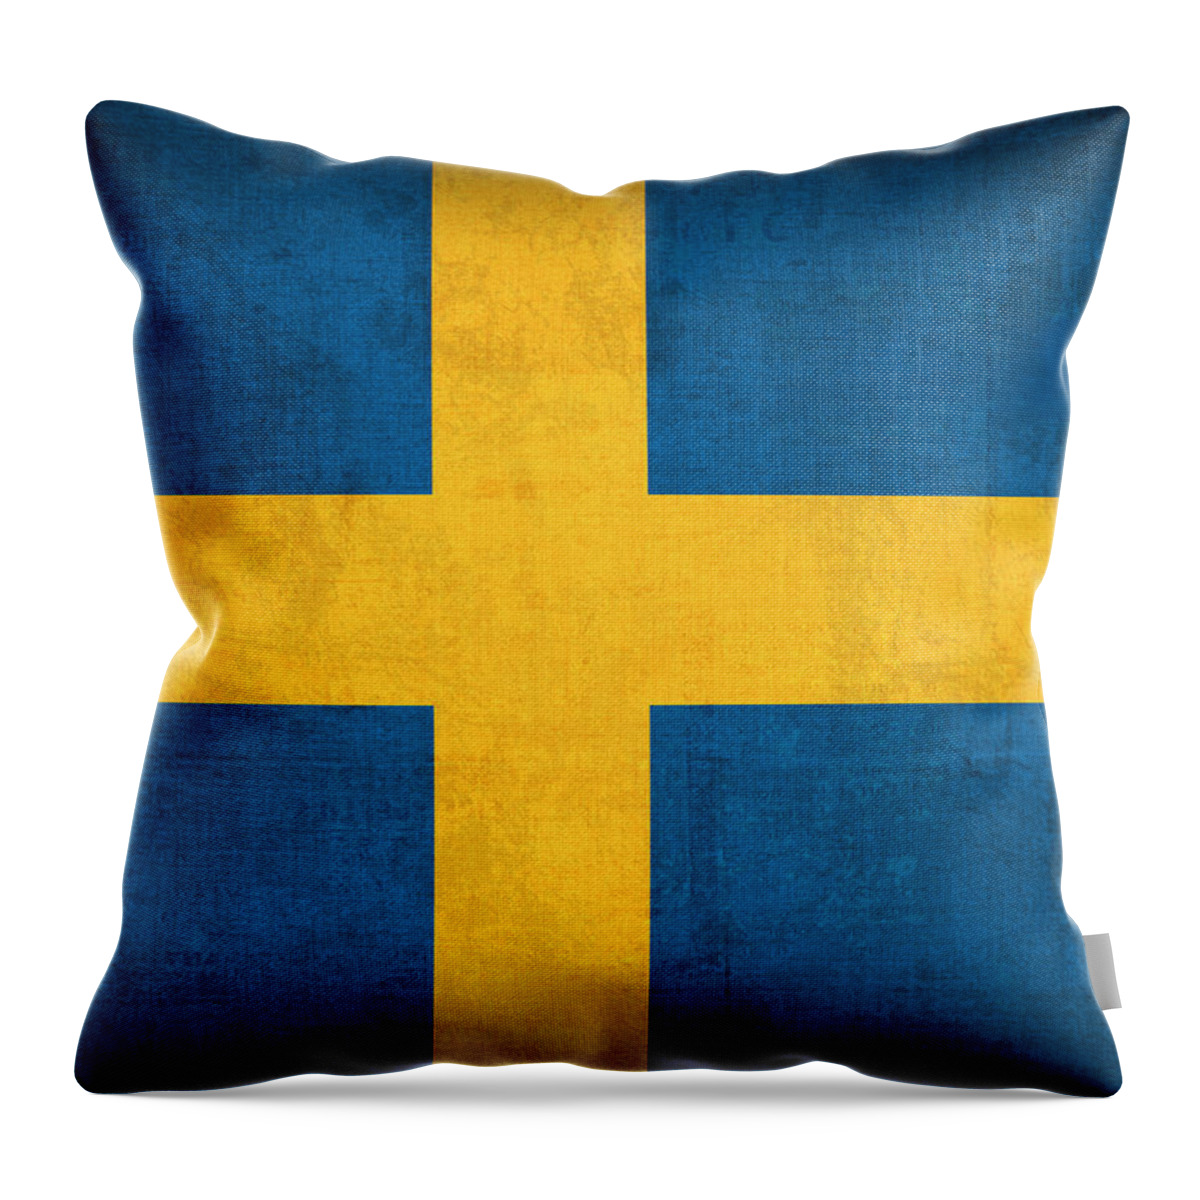 Sweden Flag Vintage Distressed Finish Throw Pillow featuring the mixed media Sweden Flag Vintage Distressed Finish by Design Turnpike